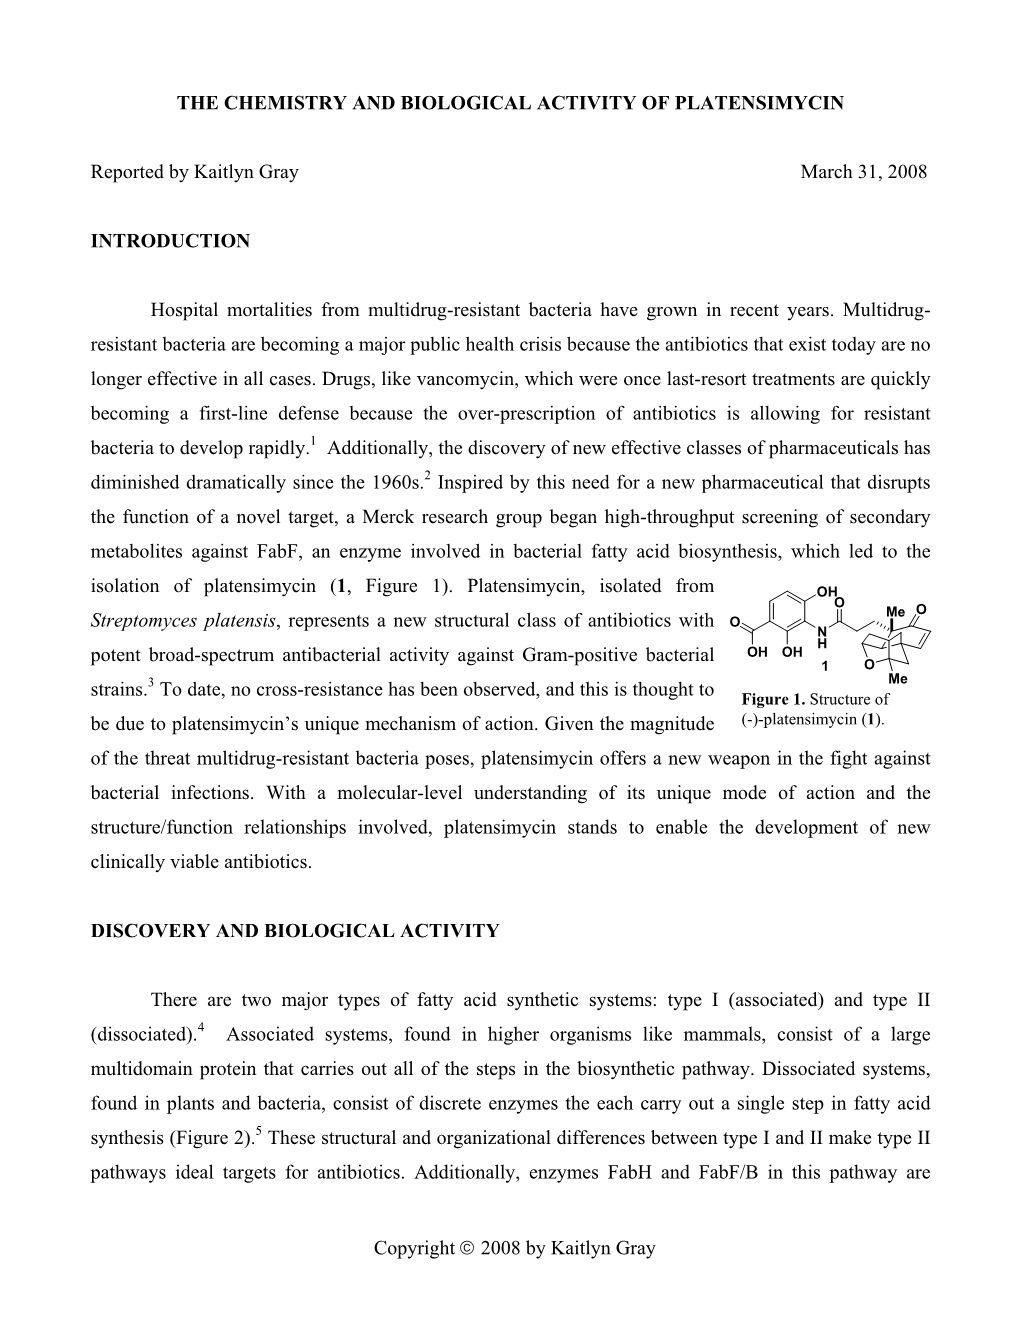 The Chemistry and Biological Activity of Platensimycin